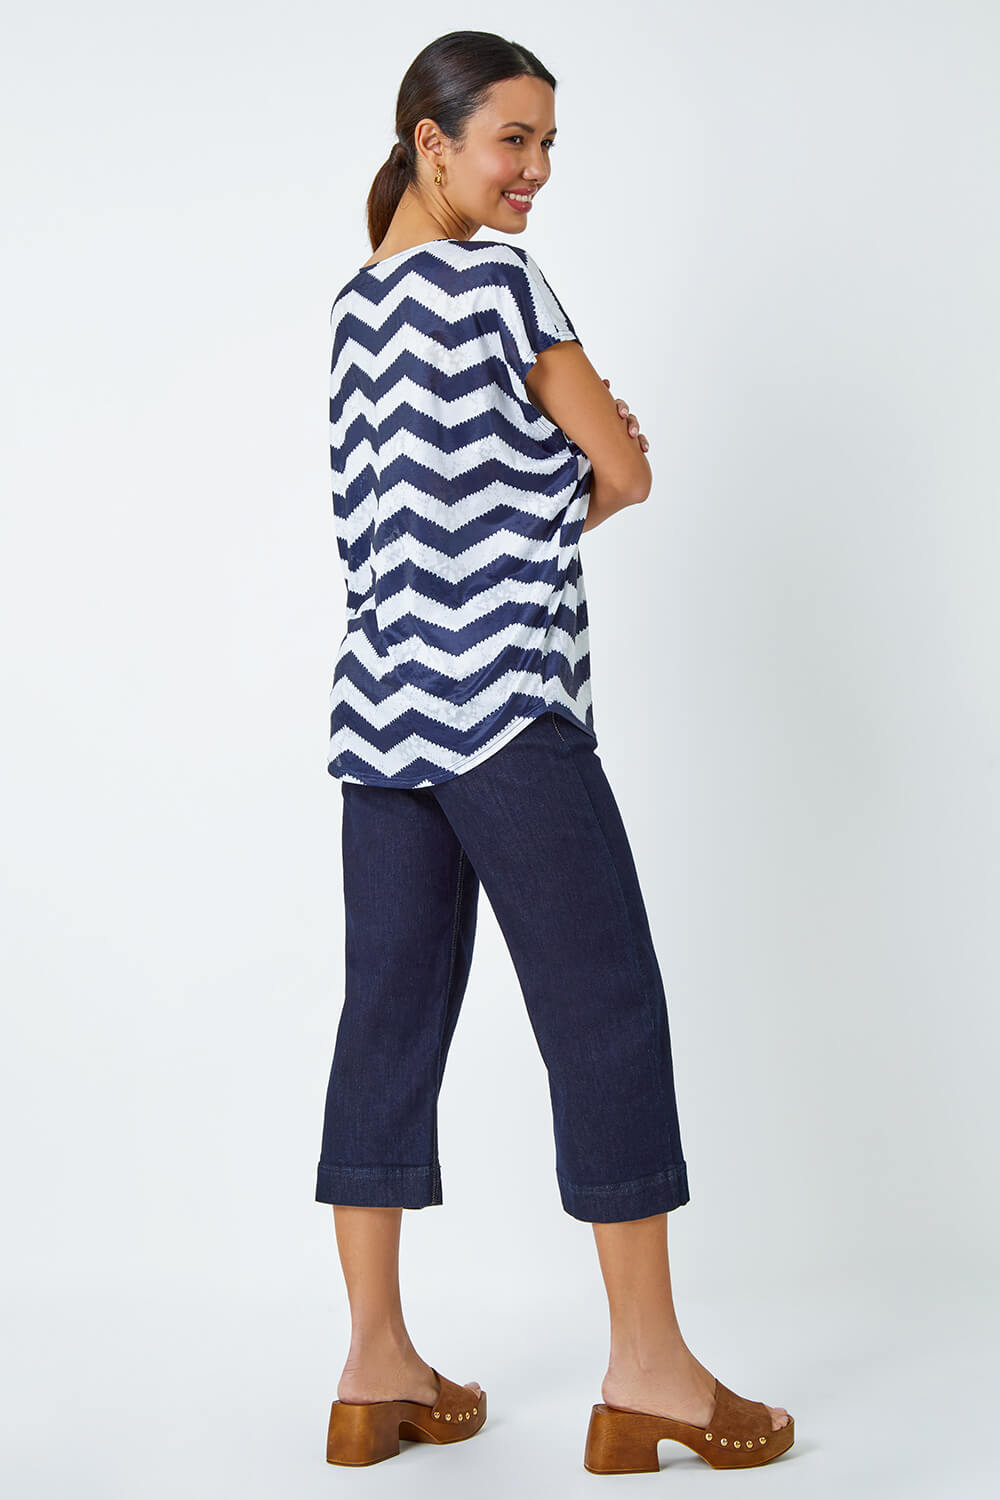 Navy  Zig Zag Print Relaxed Top, Image 3 of 5